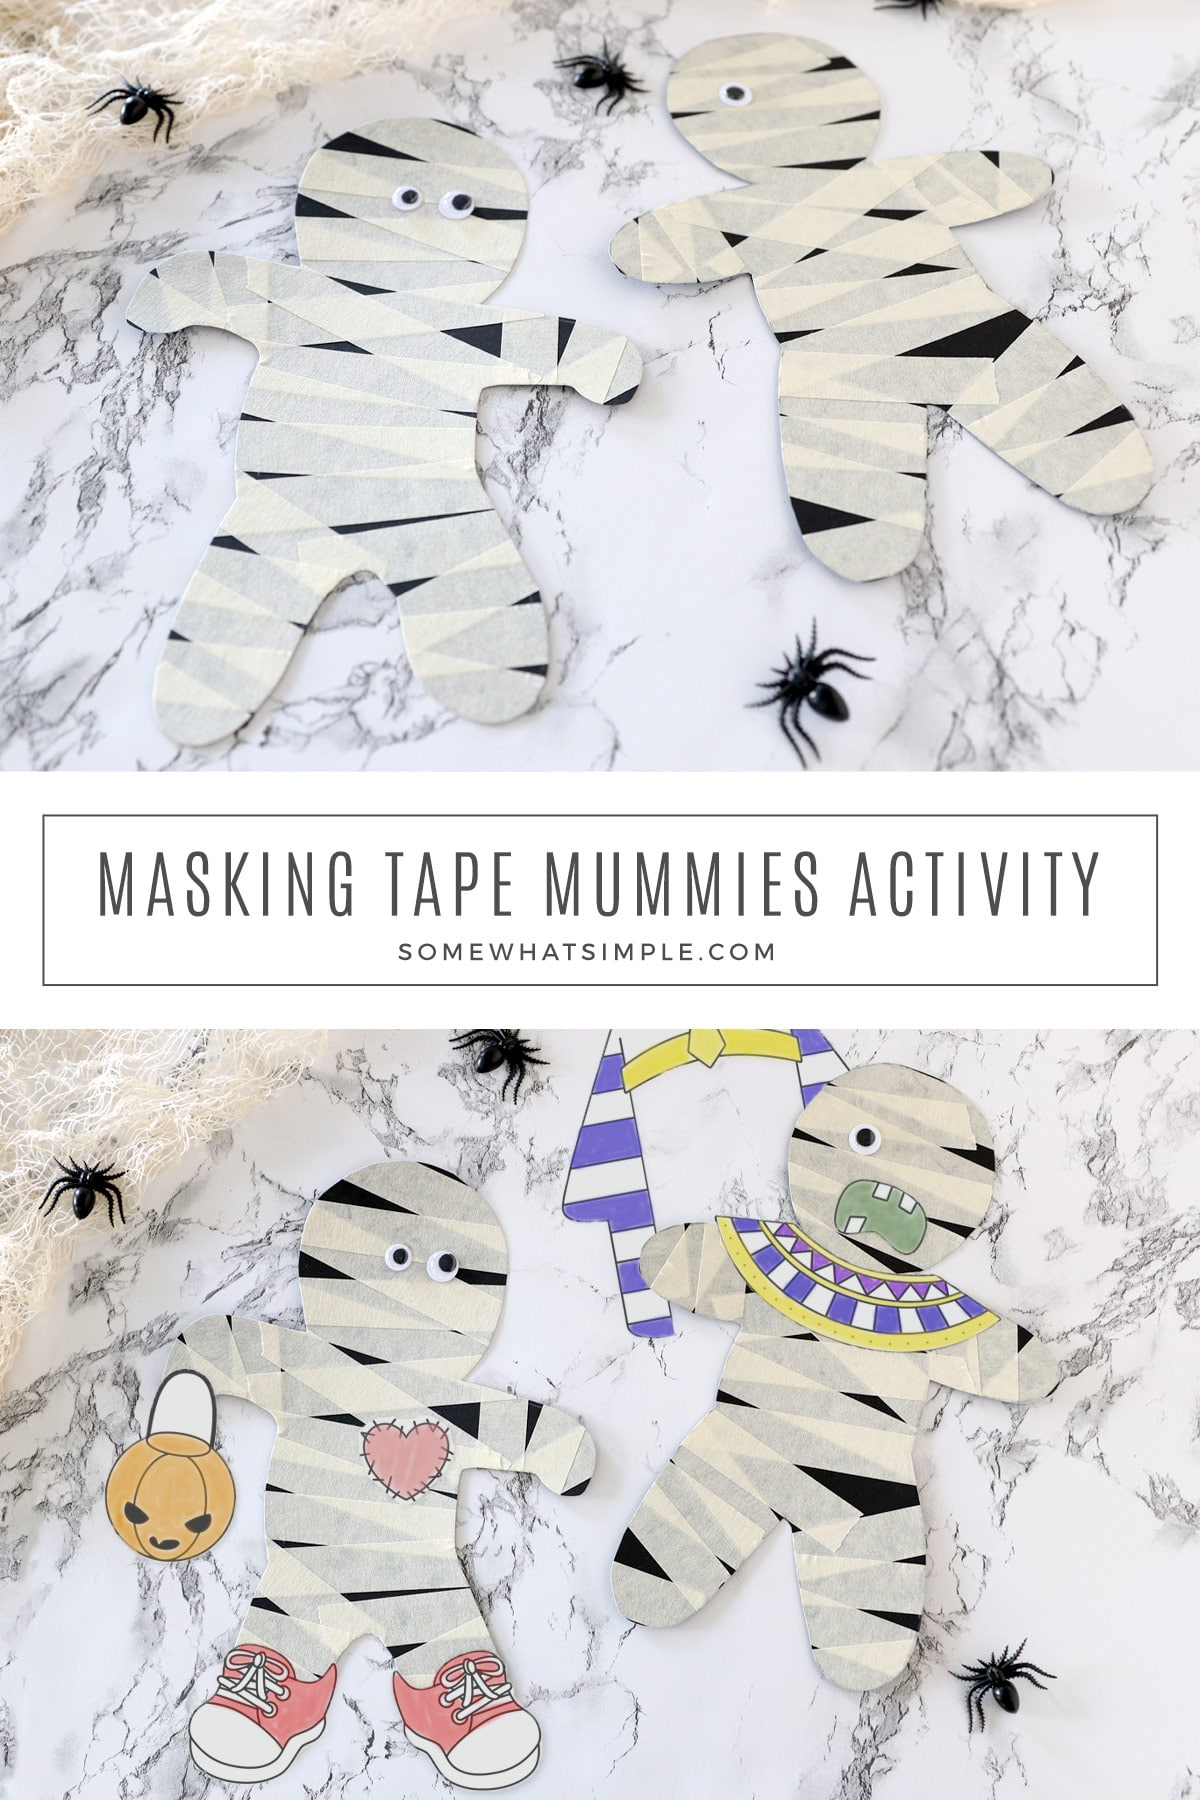 Making a mummy doesn’t have to be scary! With some masking tape, googly eyes, and our free printables, you can create a fun and simple mummy craft for Halloween. via @somewhatsimple